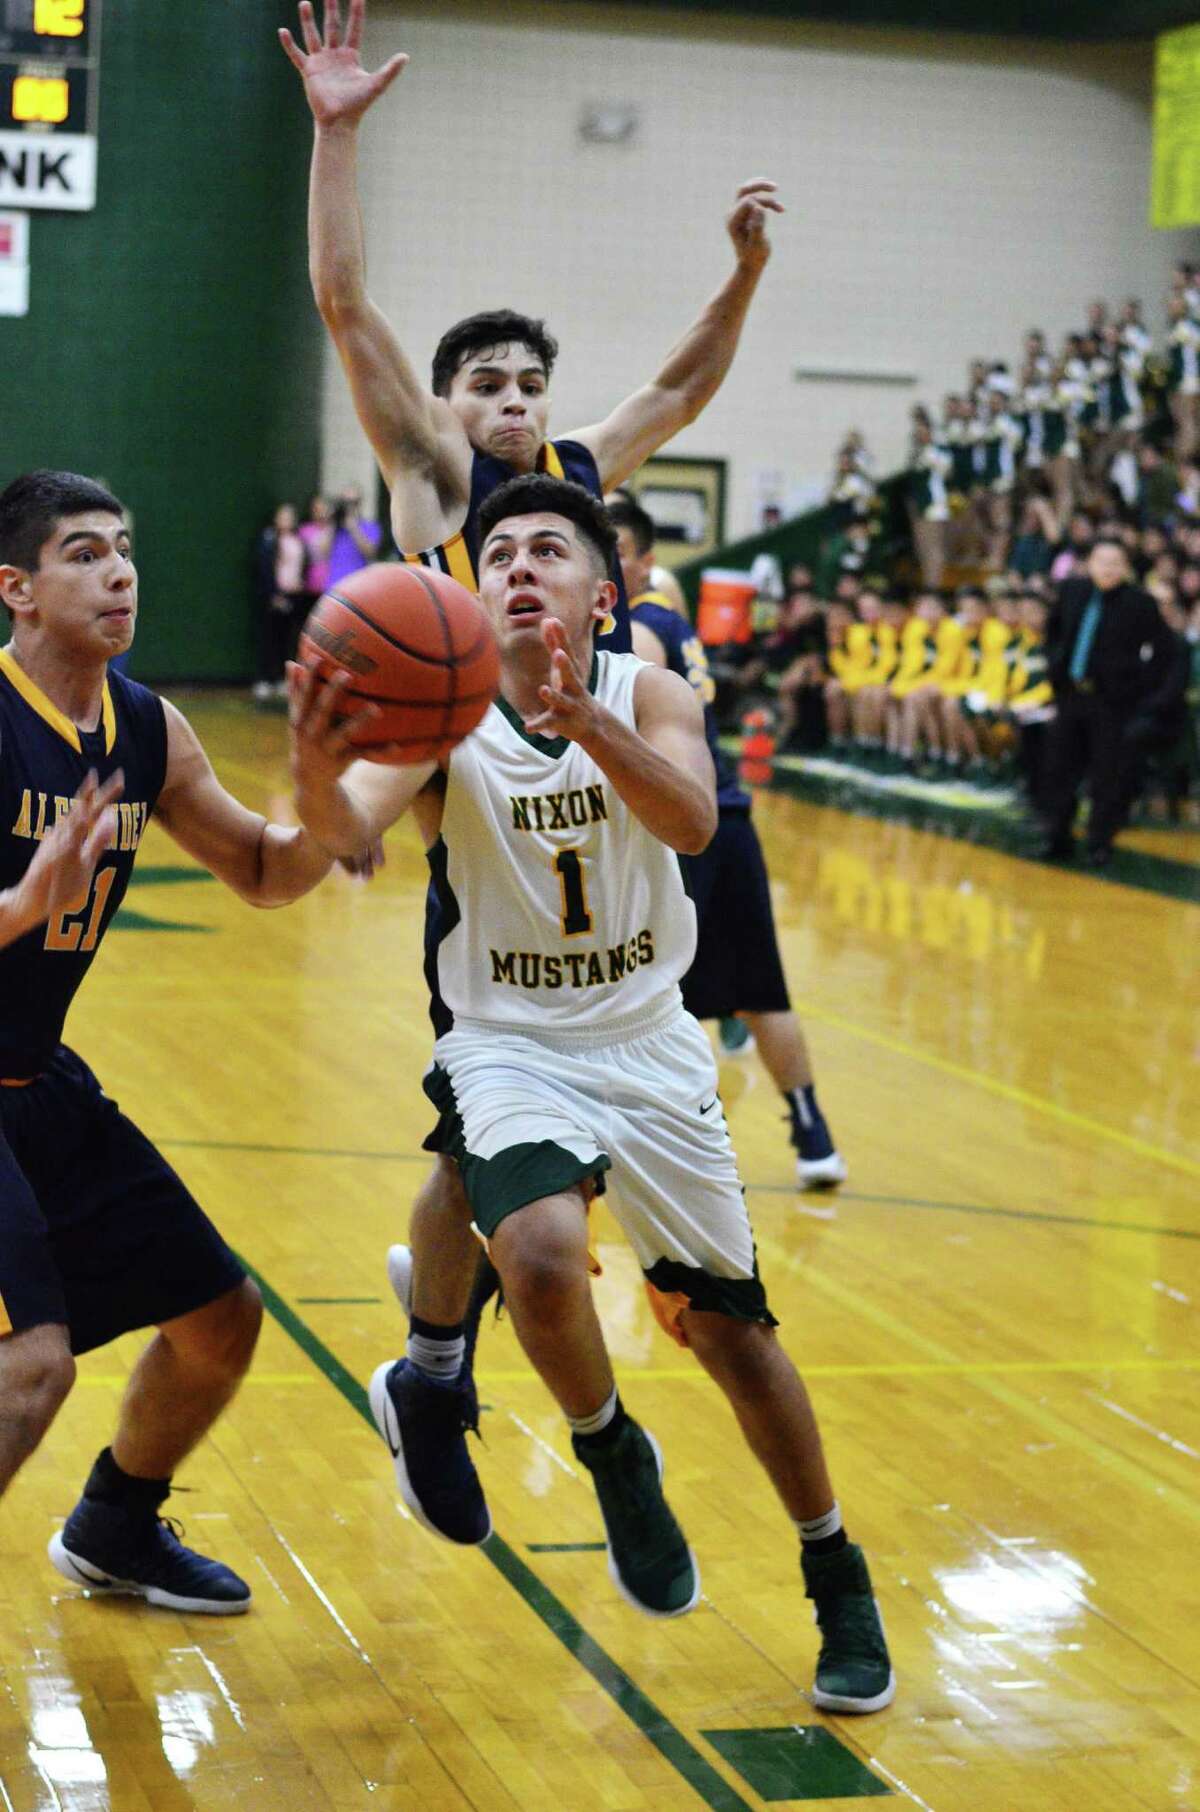 Nixon’s Esteban Guerra and the rest of the Mustangs extended their district win streak to 31 games with an 82-51 win over Veterans Memorial on Tuesday night in Mission.